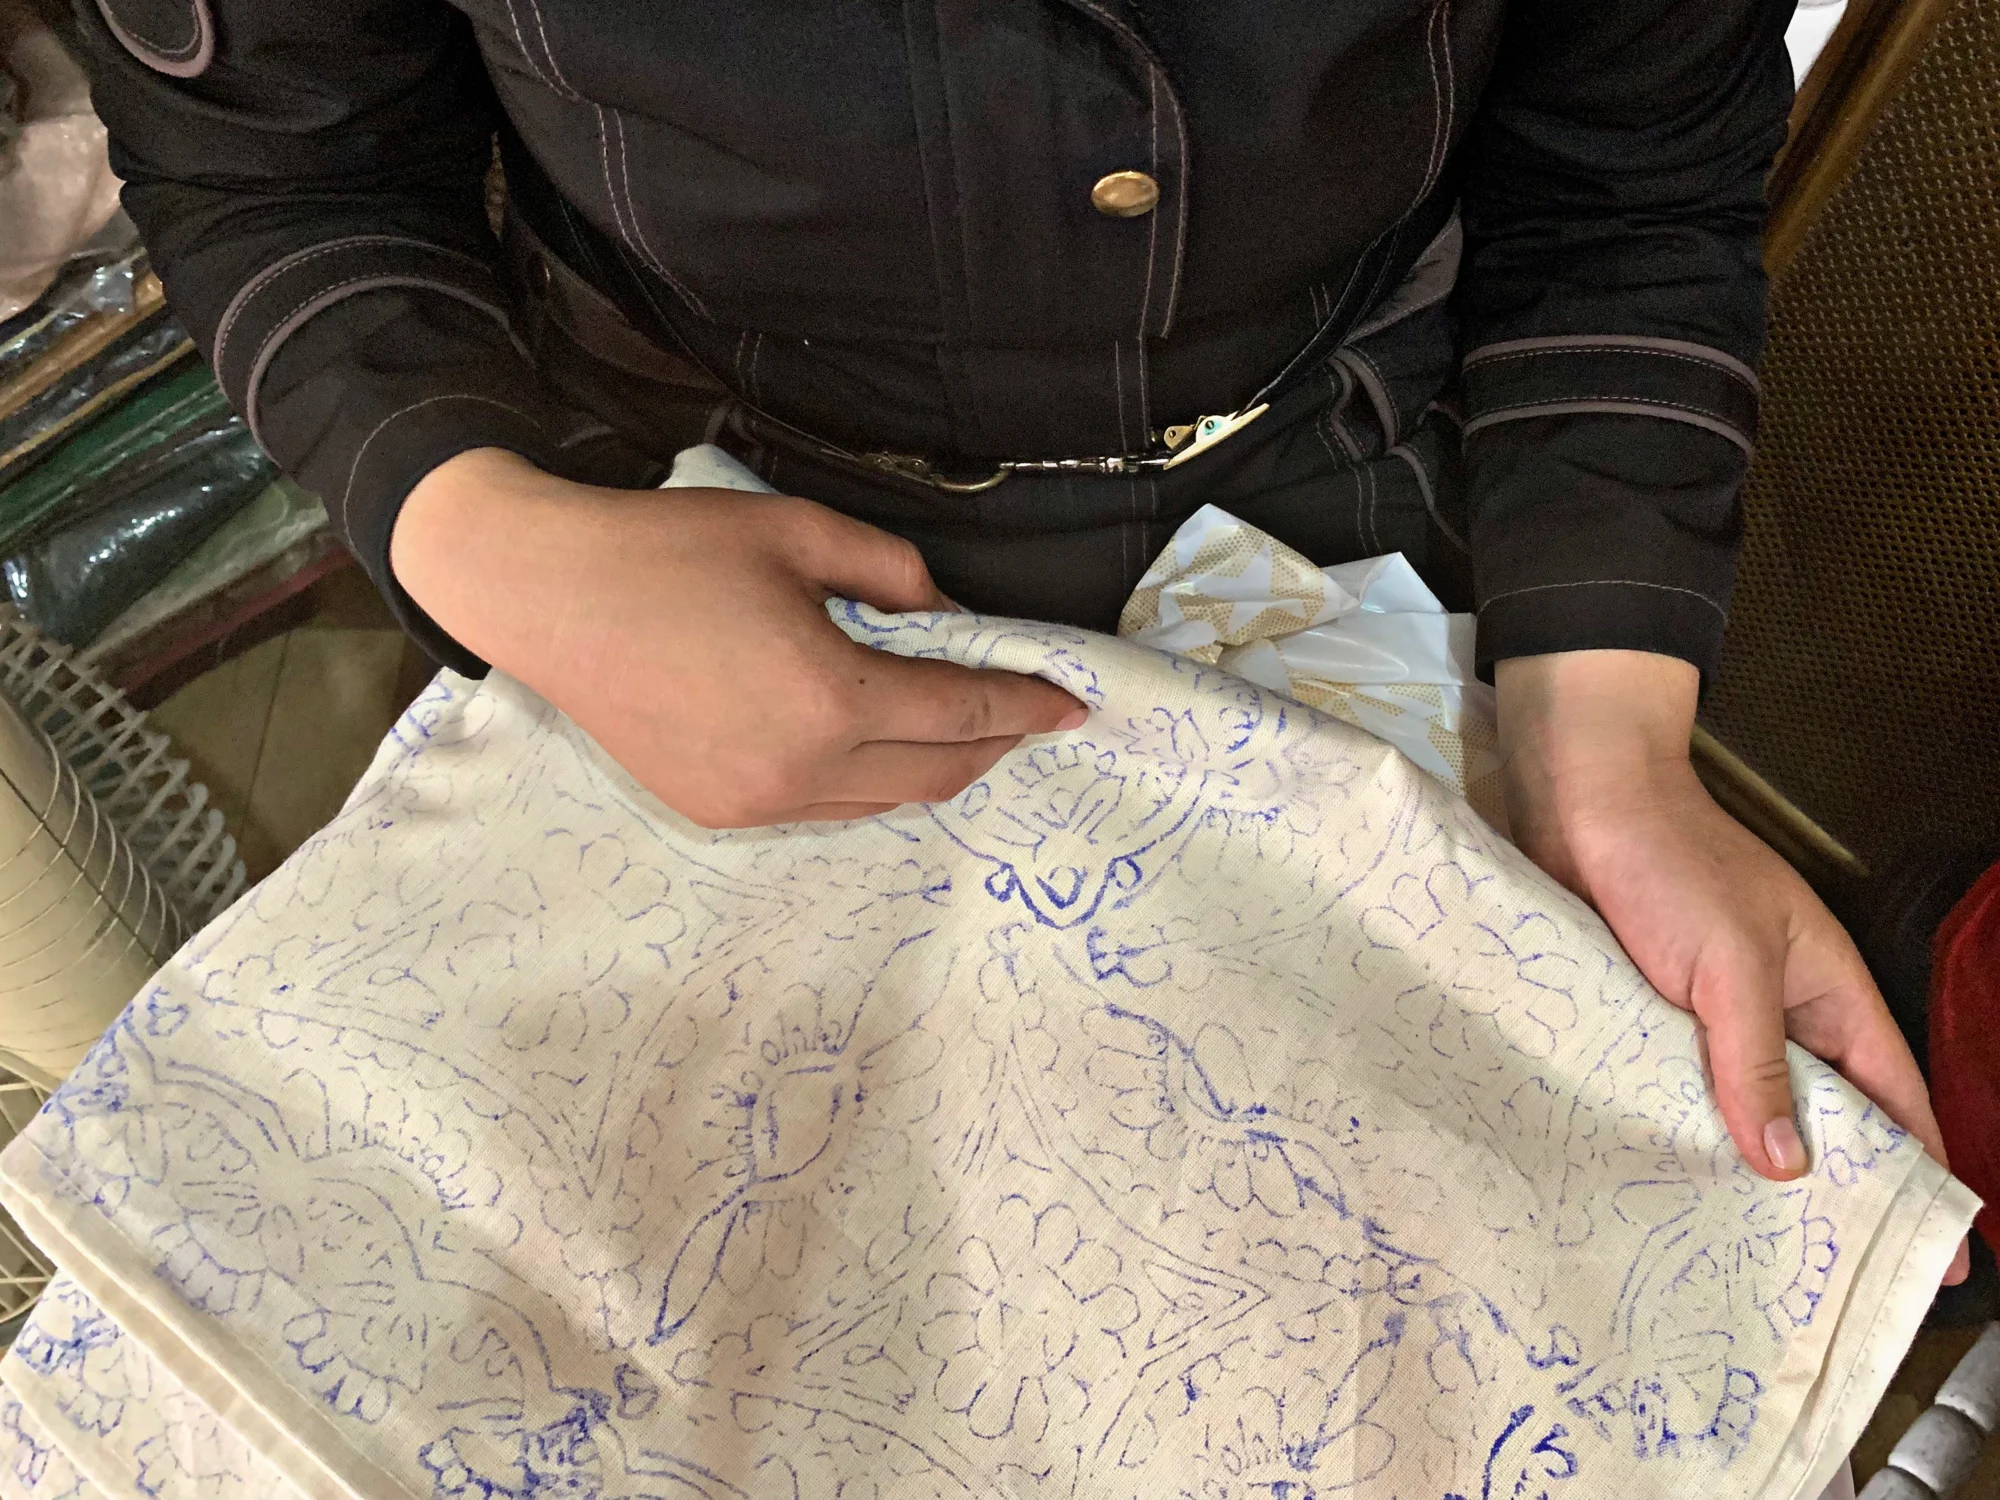 A sample of the handprinted fabric prepared for the women of Douma.